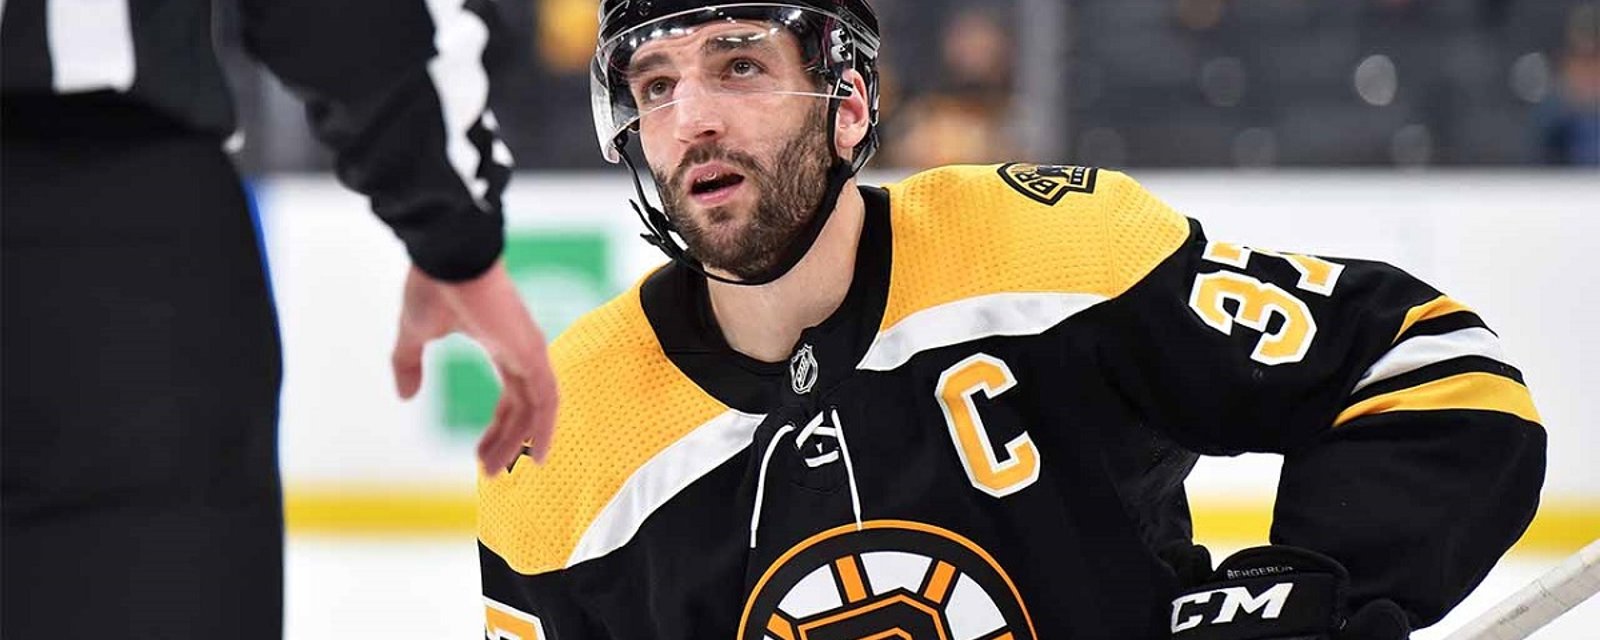 Bad news for Patrice Bergeron, Brad Marchand and Hampus Lindholm.